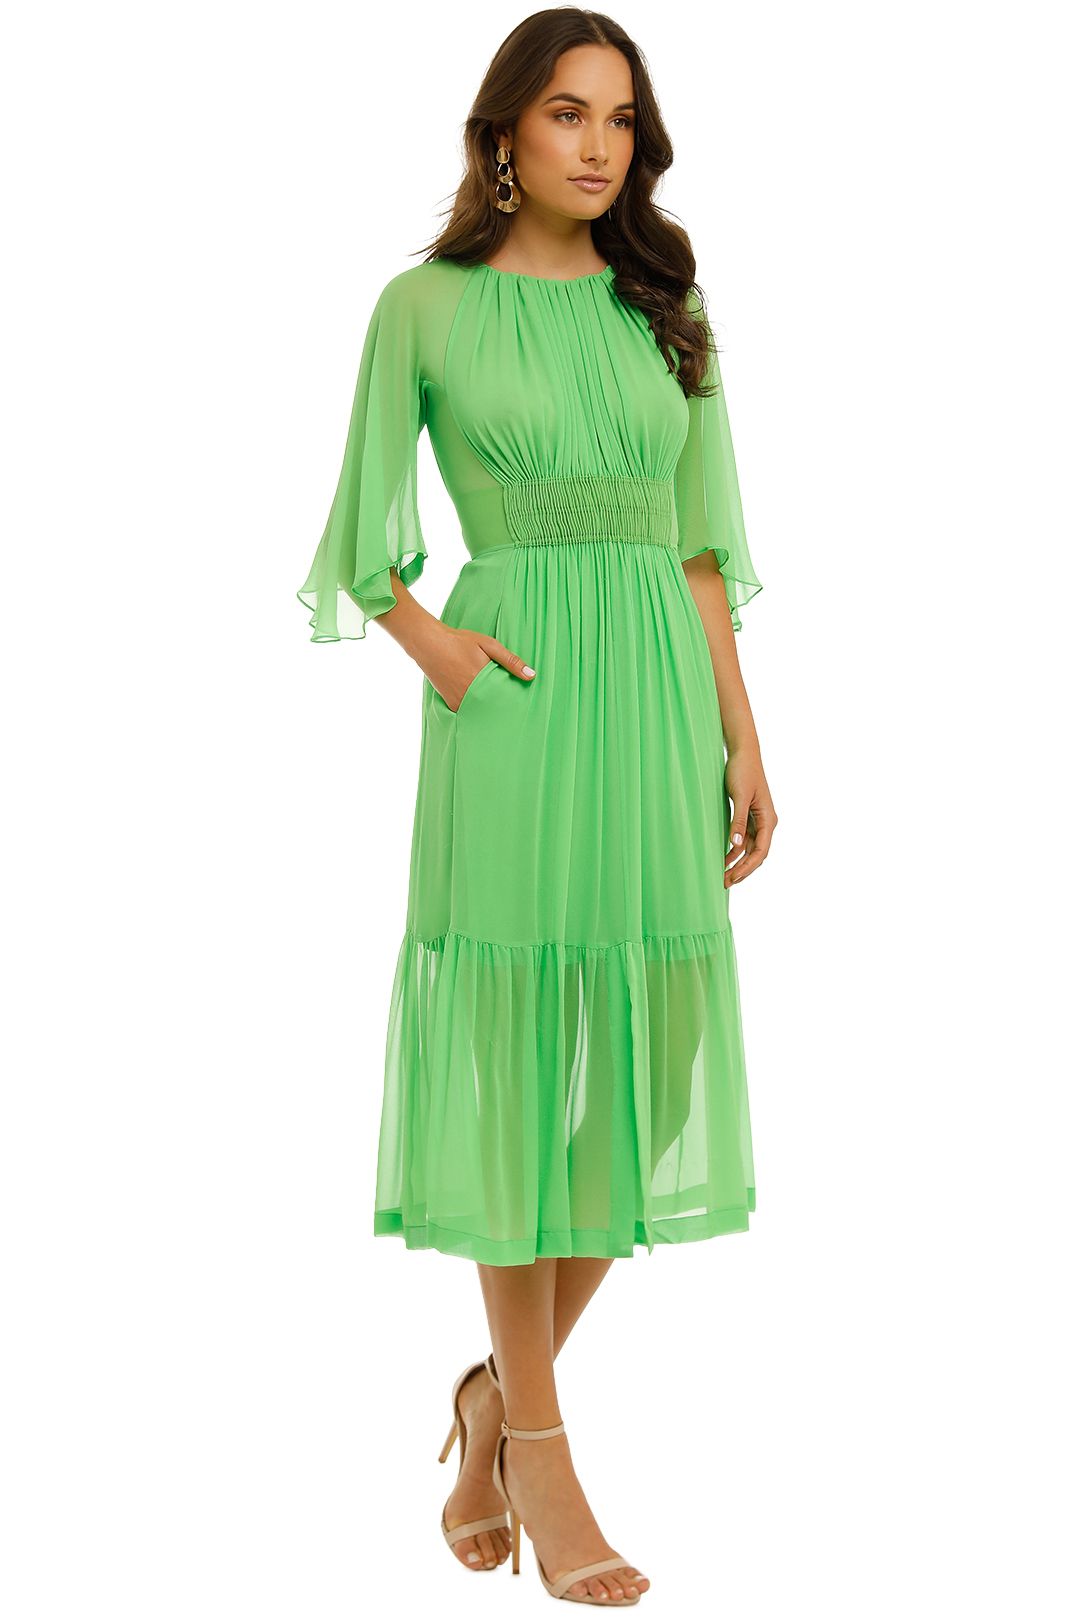 Fellowship Dress in Neo Green by KITX for Hire | GlamCorner